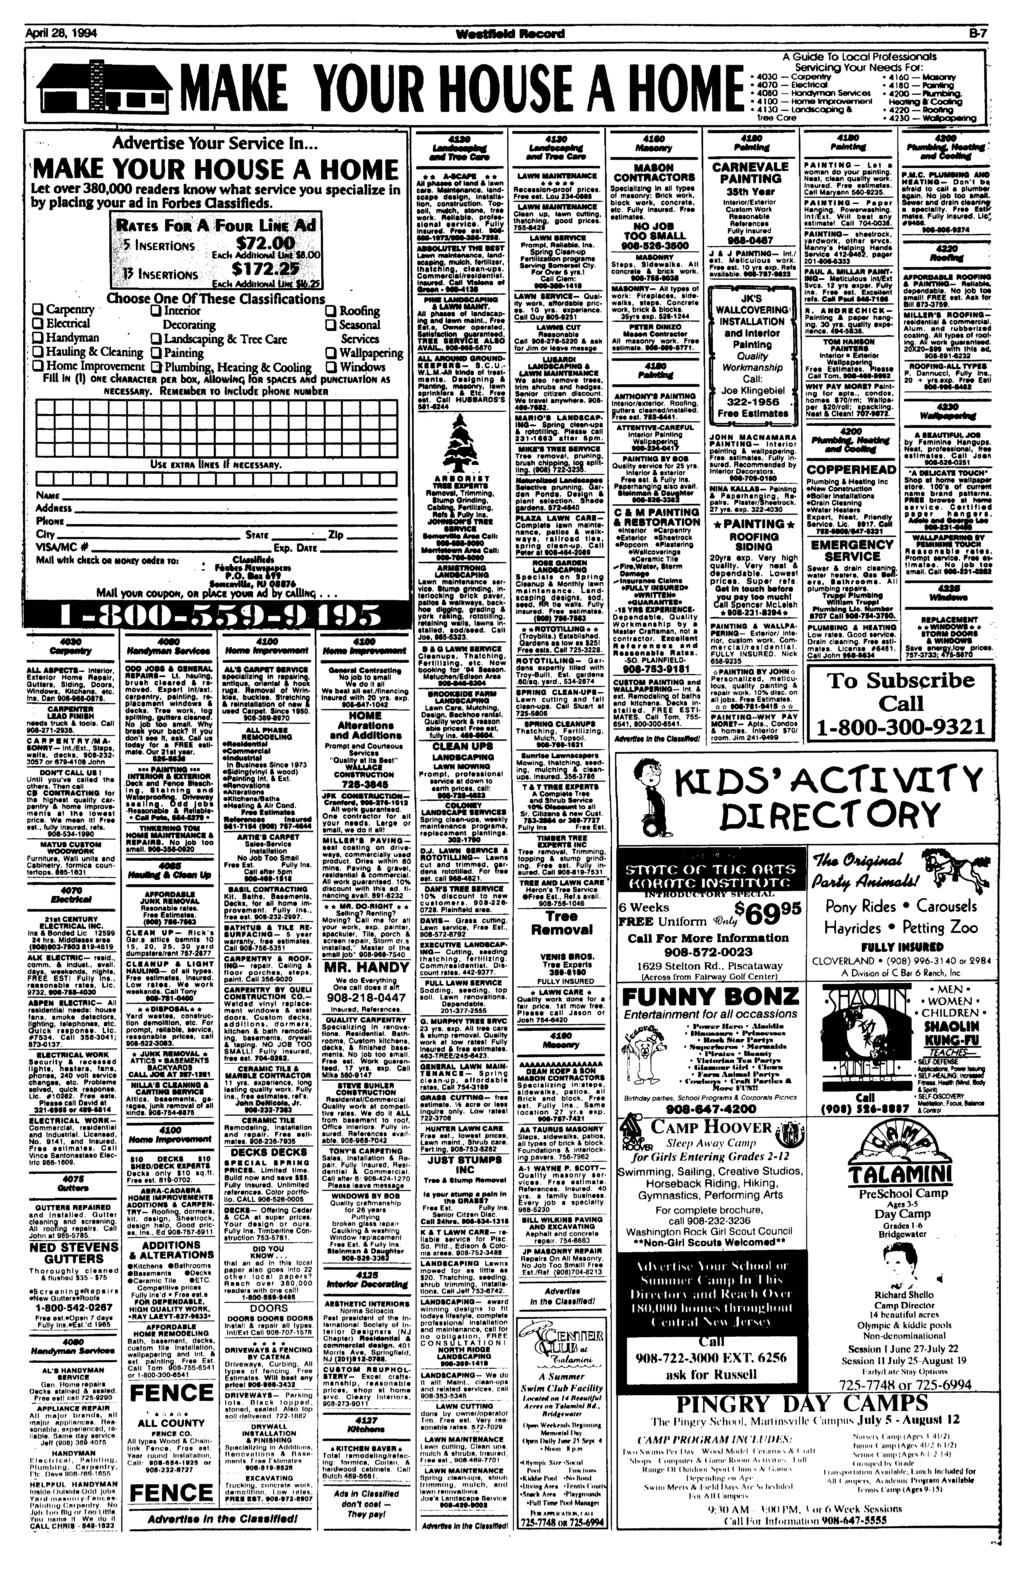 April 28,1994 WeMfftoM Record B-7 Advertise Your Service In... MAKE YOUR HOUSE A HOME Let over 380,000 readers know what service you specialize in by placing your ad in Forbes Classifieds.